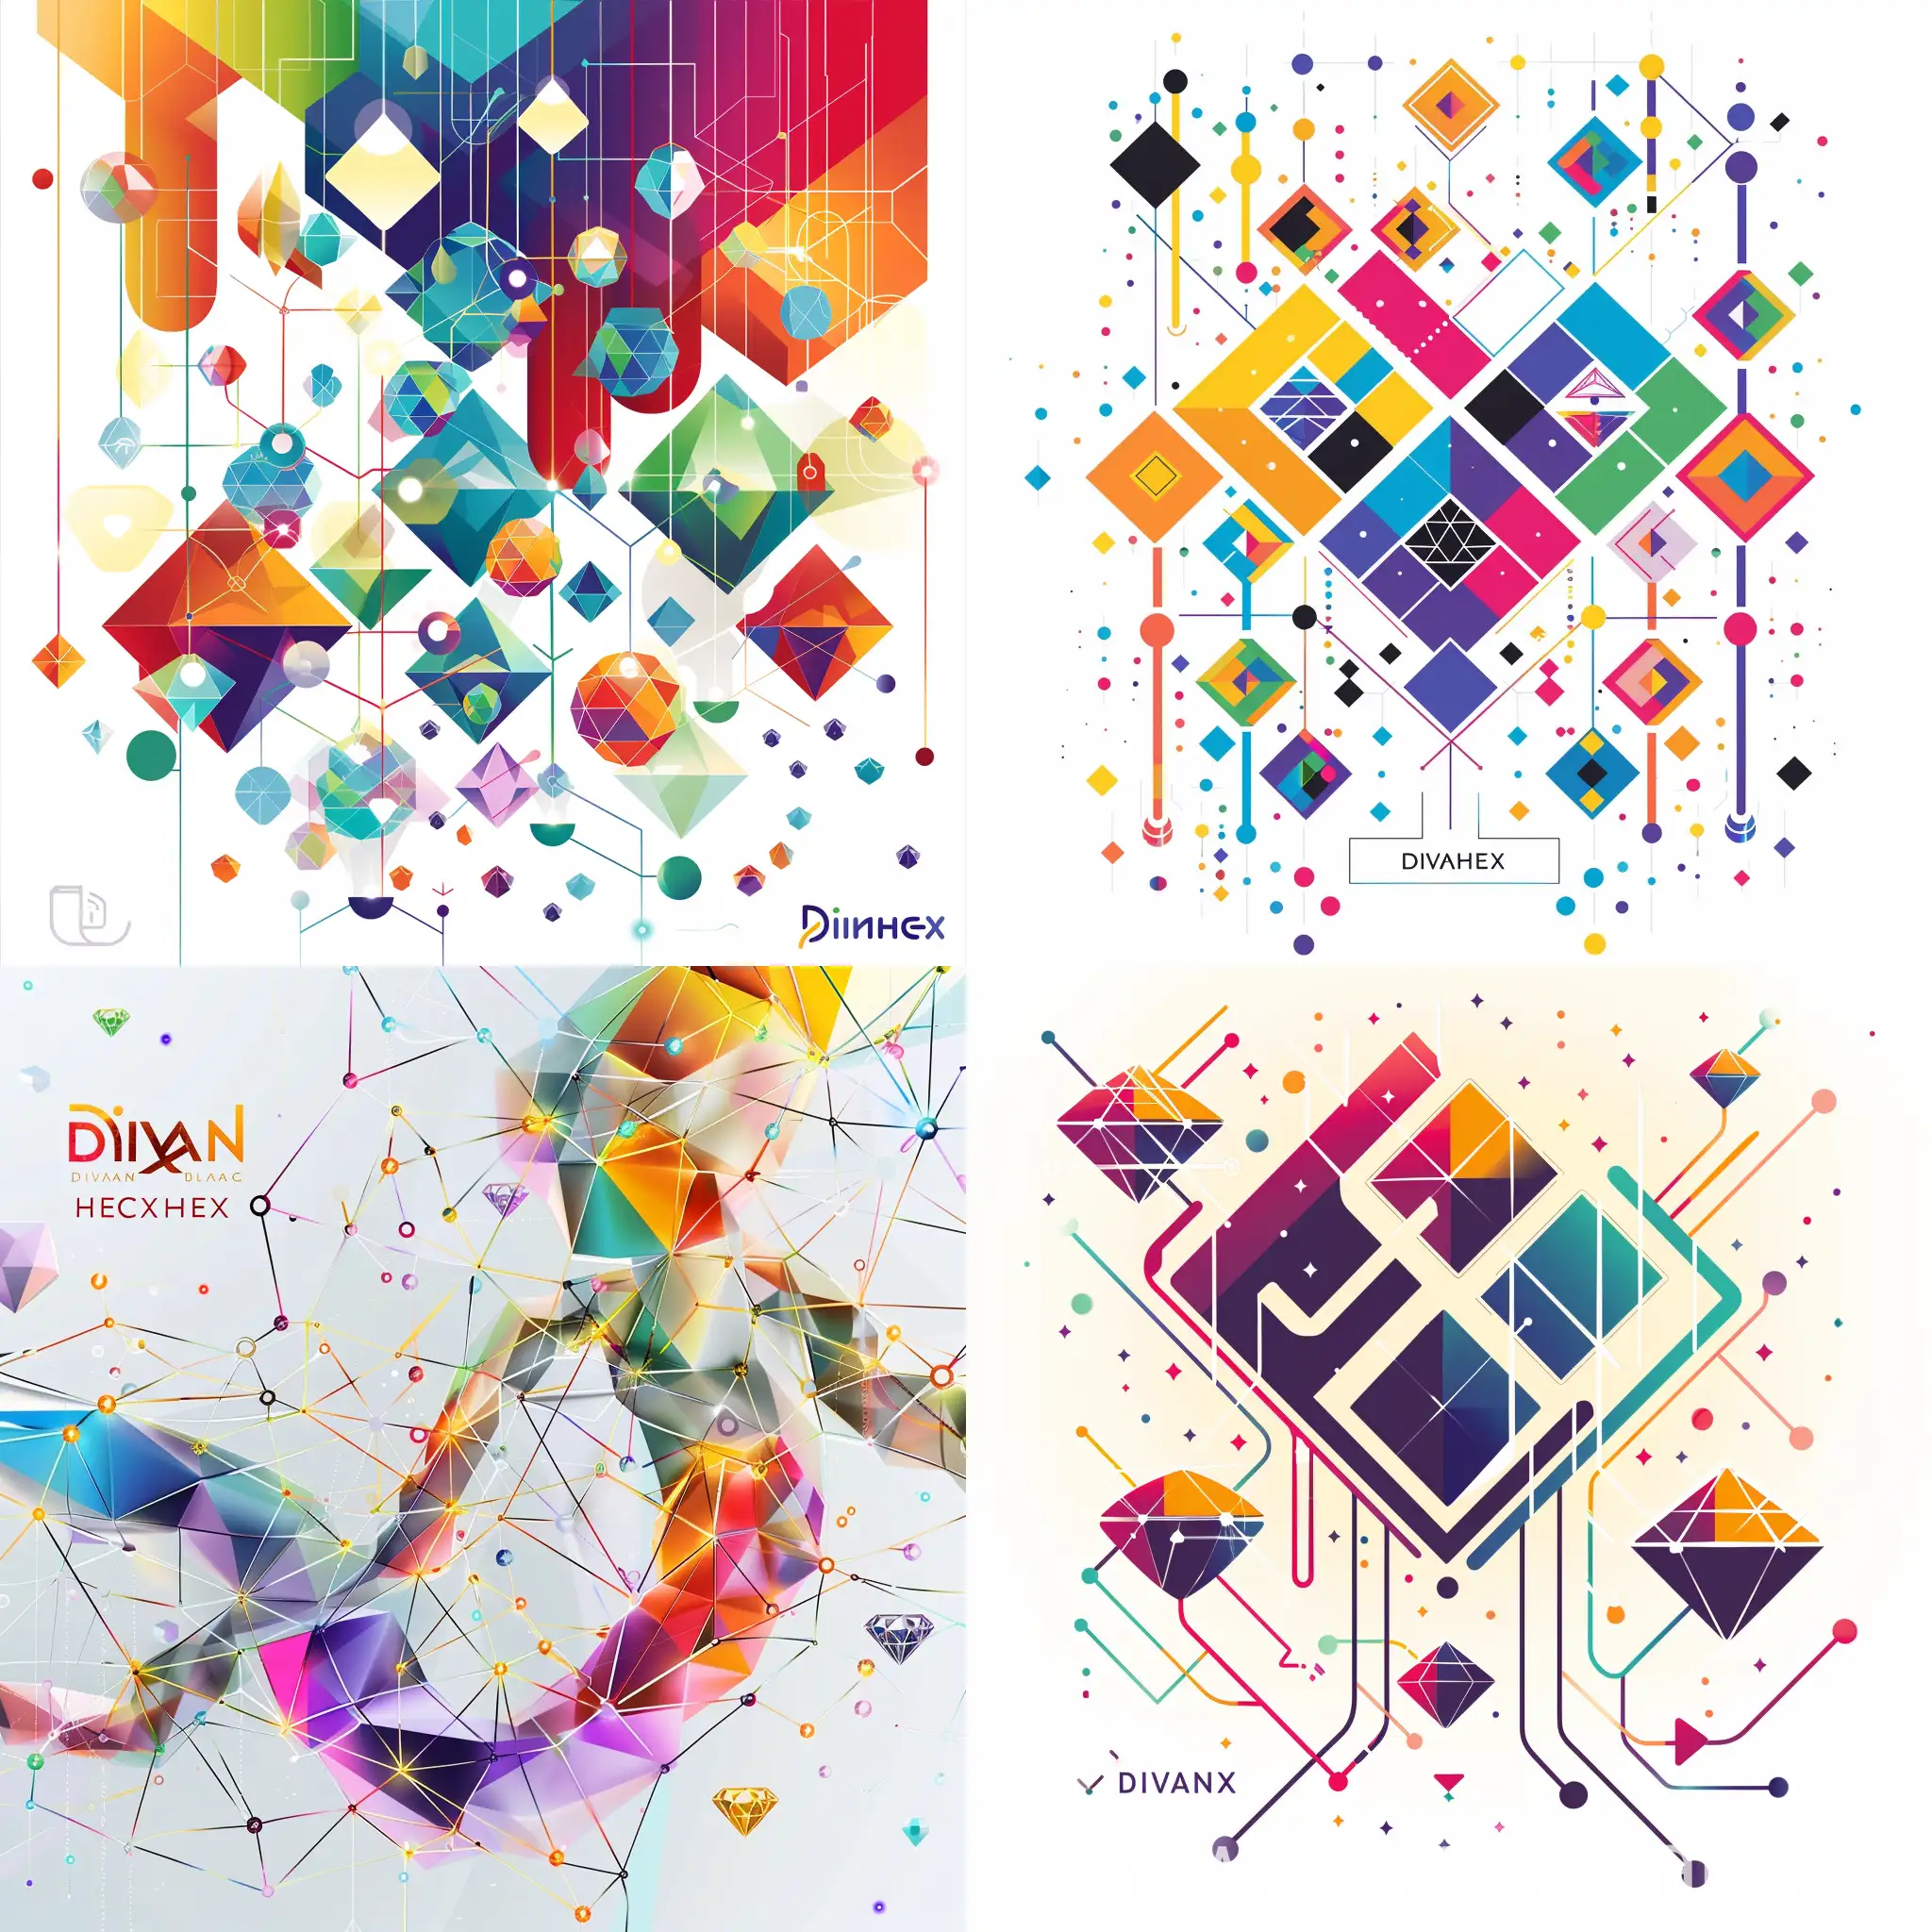 Abstract, geometric shapes, connected network, colorful, modern, diamonds (as a geometric shape), tubes representing flow, DivanHex (combine "Divan" and "Hexagon" for a visual brand connection)